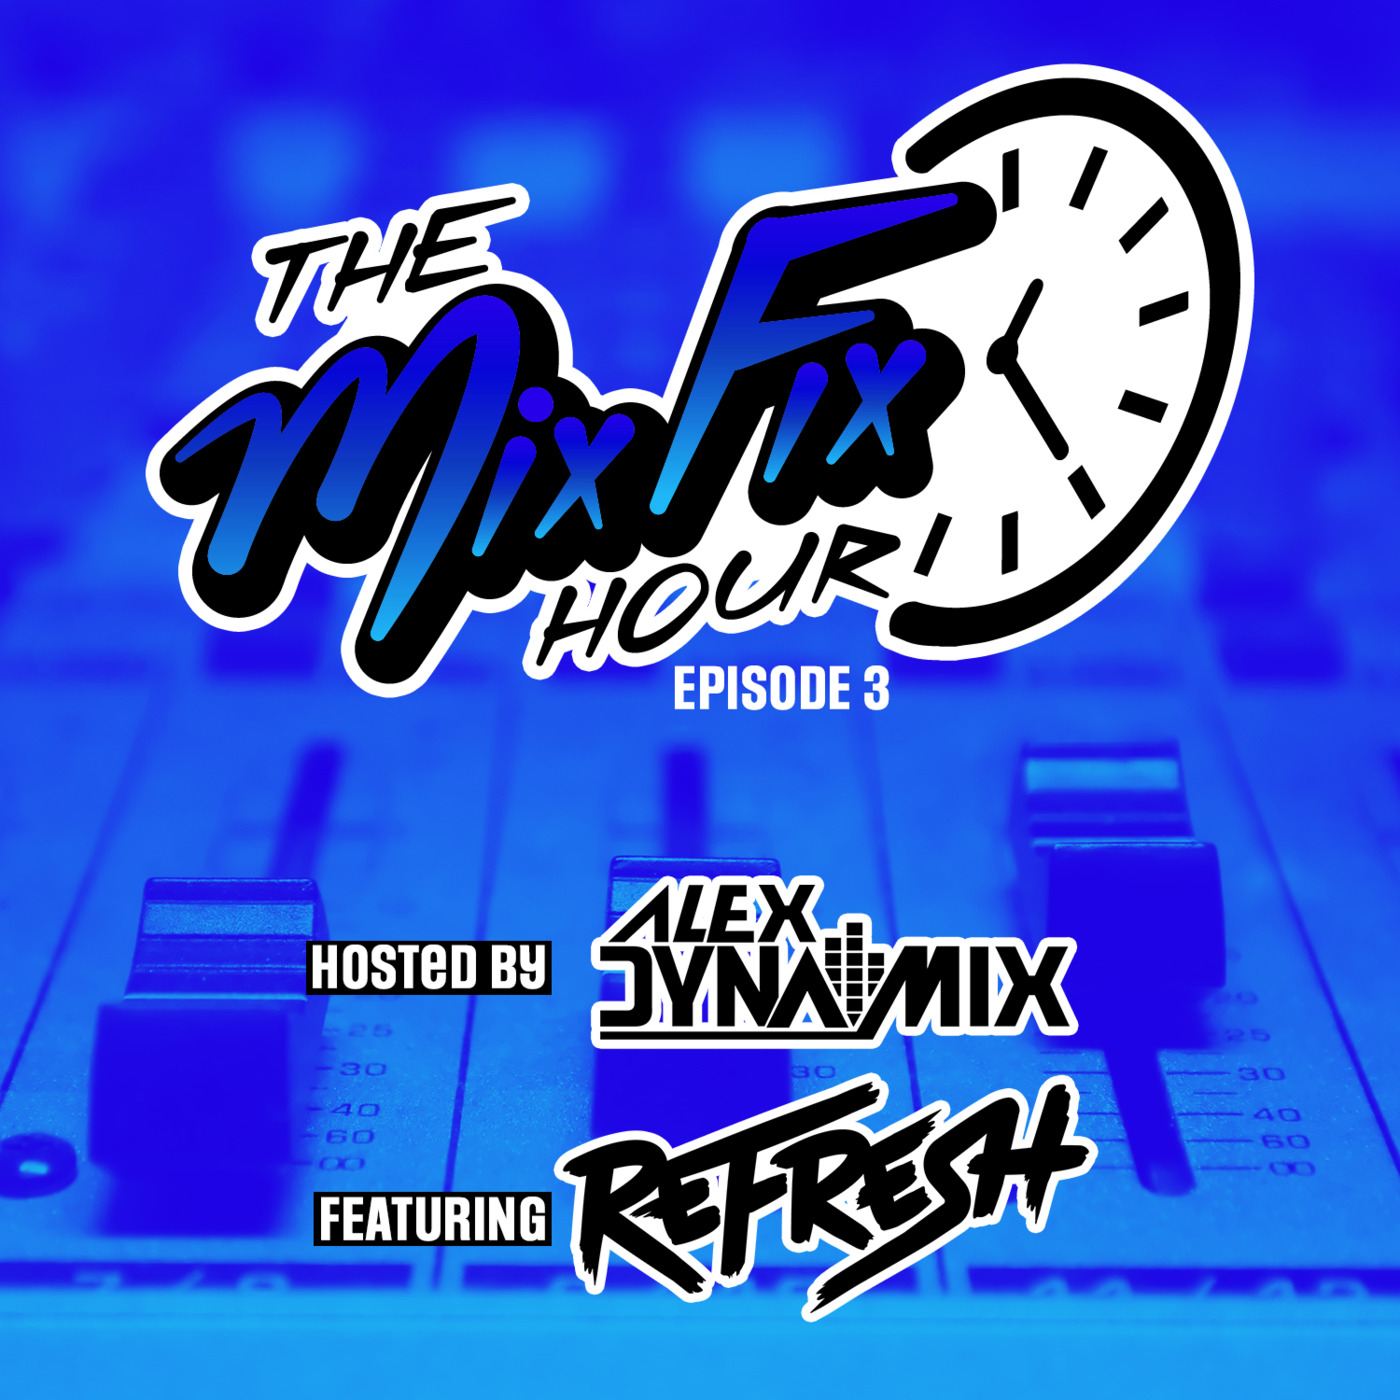 The Mix Fix Hour Hosted By Alex Dynamix - Episode 3 Feat. Refresh